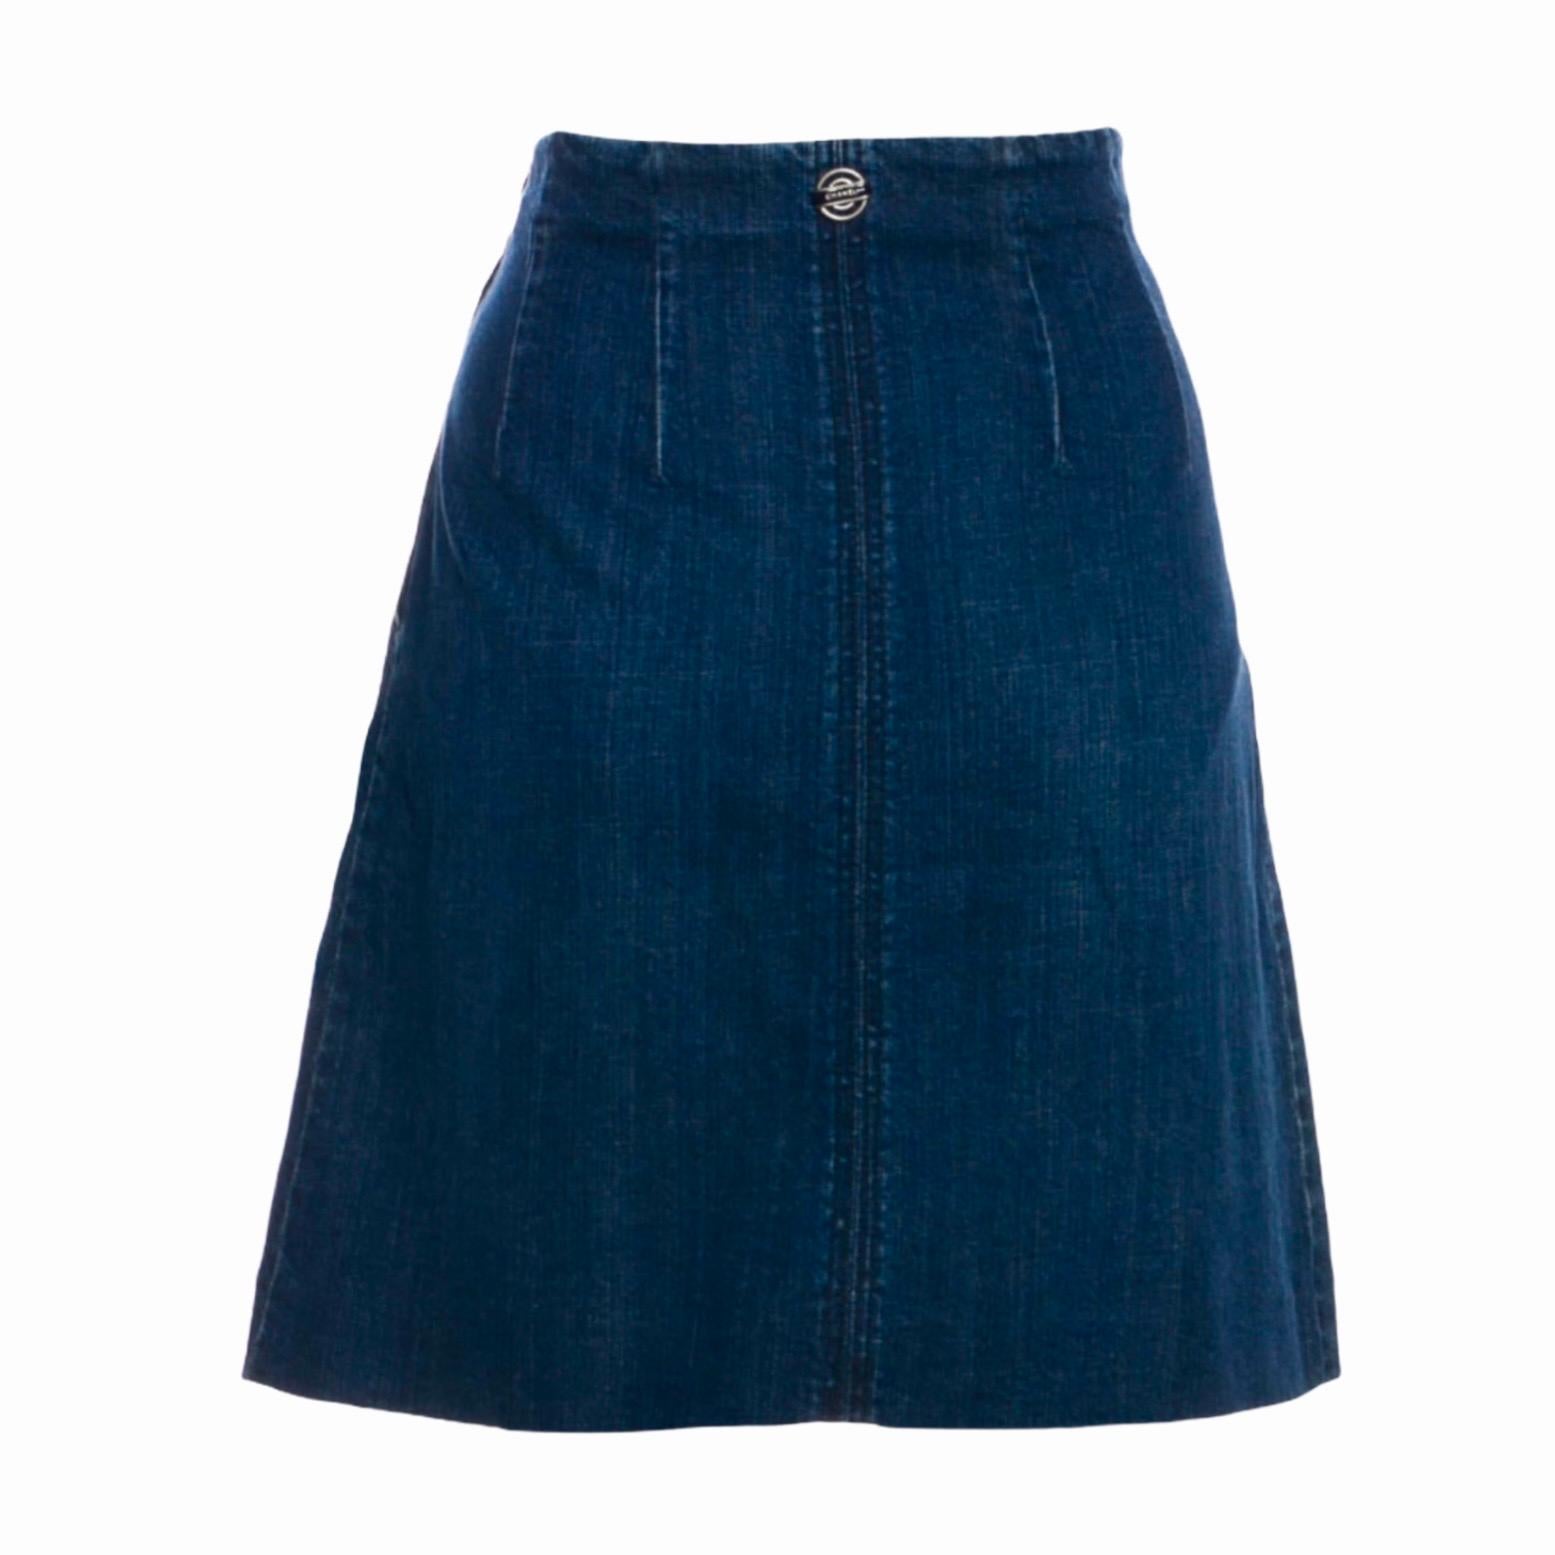 Beautiful denim skirt by CHANEL
A true CHANEL signature item that will last you for many years
Soft denim fabric in used look
Pleated details in front
Skirt opens with a zip
CHANEL CC logo embellishement on back
Dry Clean Only
Retail price 3759$